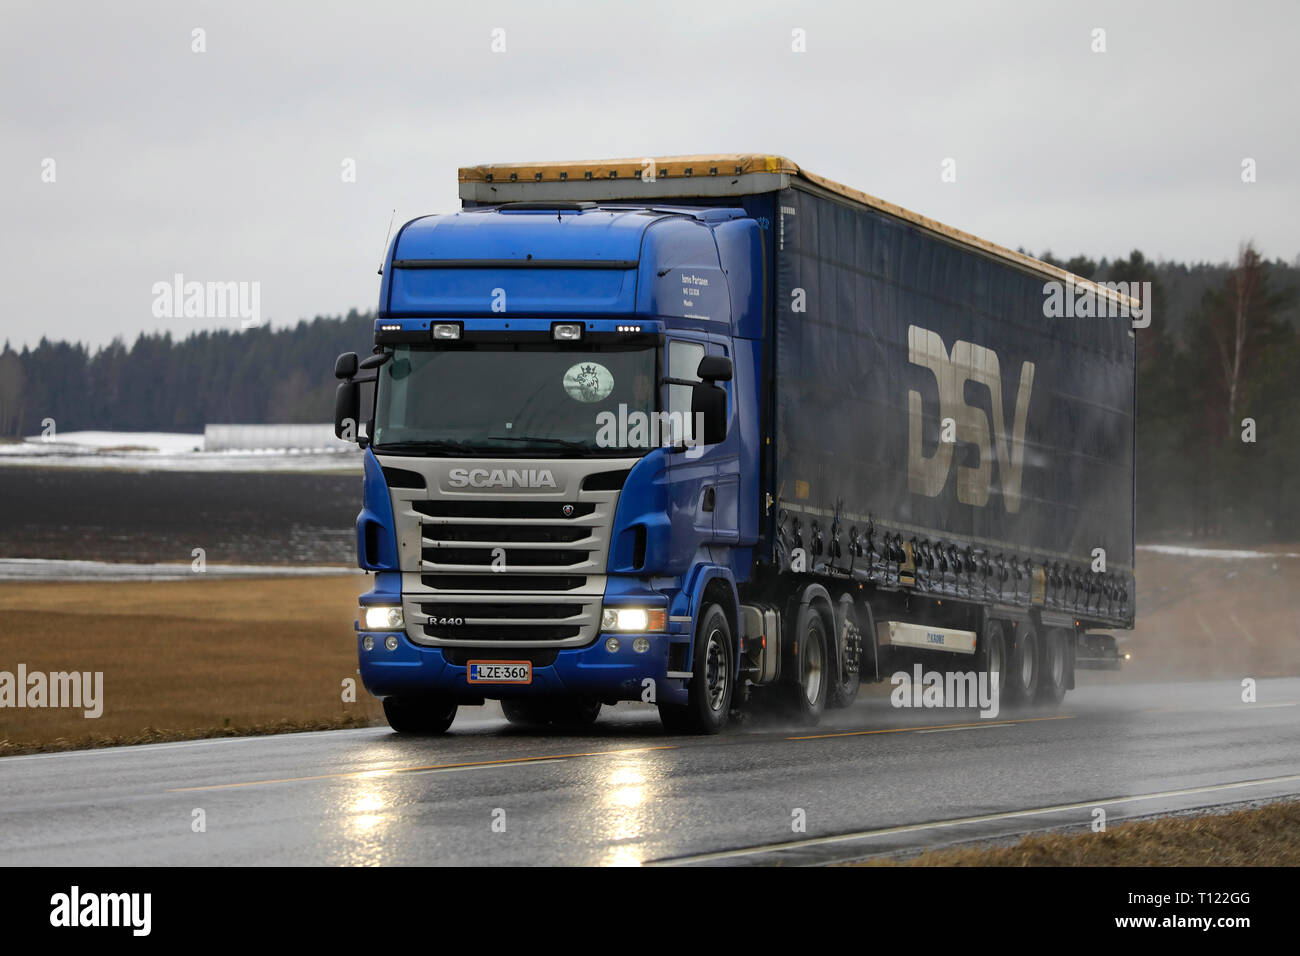 Salo, Finland - March 8, 2019: Blue Scania R440 truck of Ismo Partanen pulls semi trailer along wet highway on a rainy day of early spring in Finland. Stock Photo